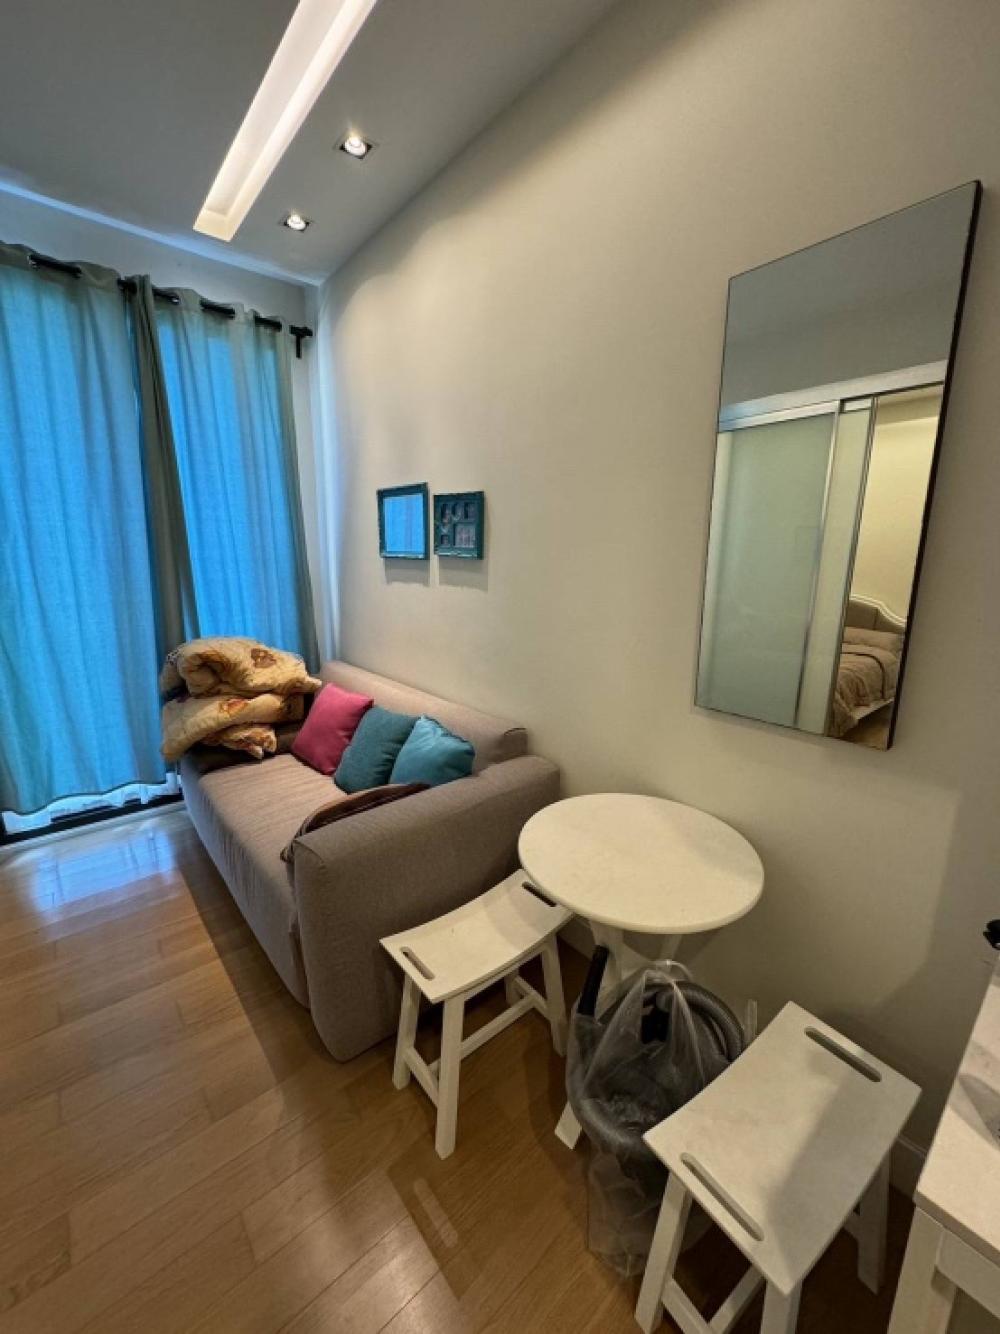 For RentCondoLadprao, Central Ladprao : Condo for rent equinox phahol-vipha, size 31 sq m, 1 bedroom, 1 bathroom, price 12,000 / month, call 093-028-1245id line: properagency